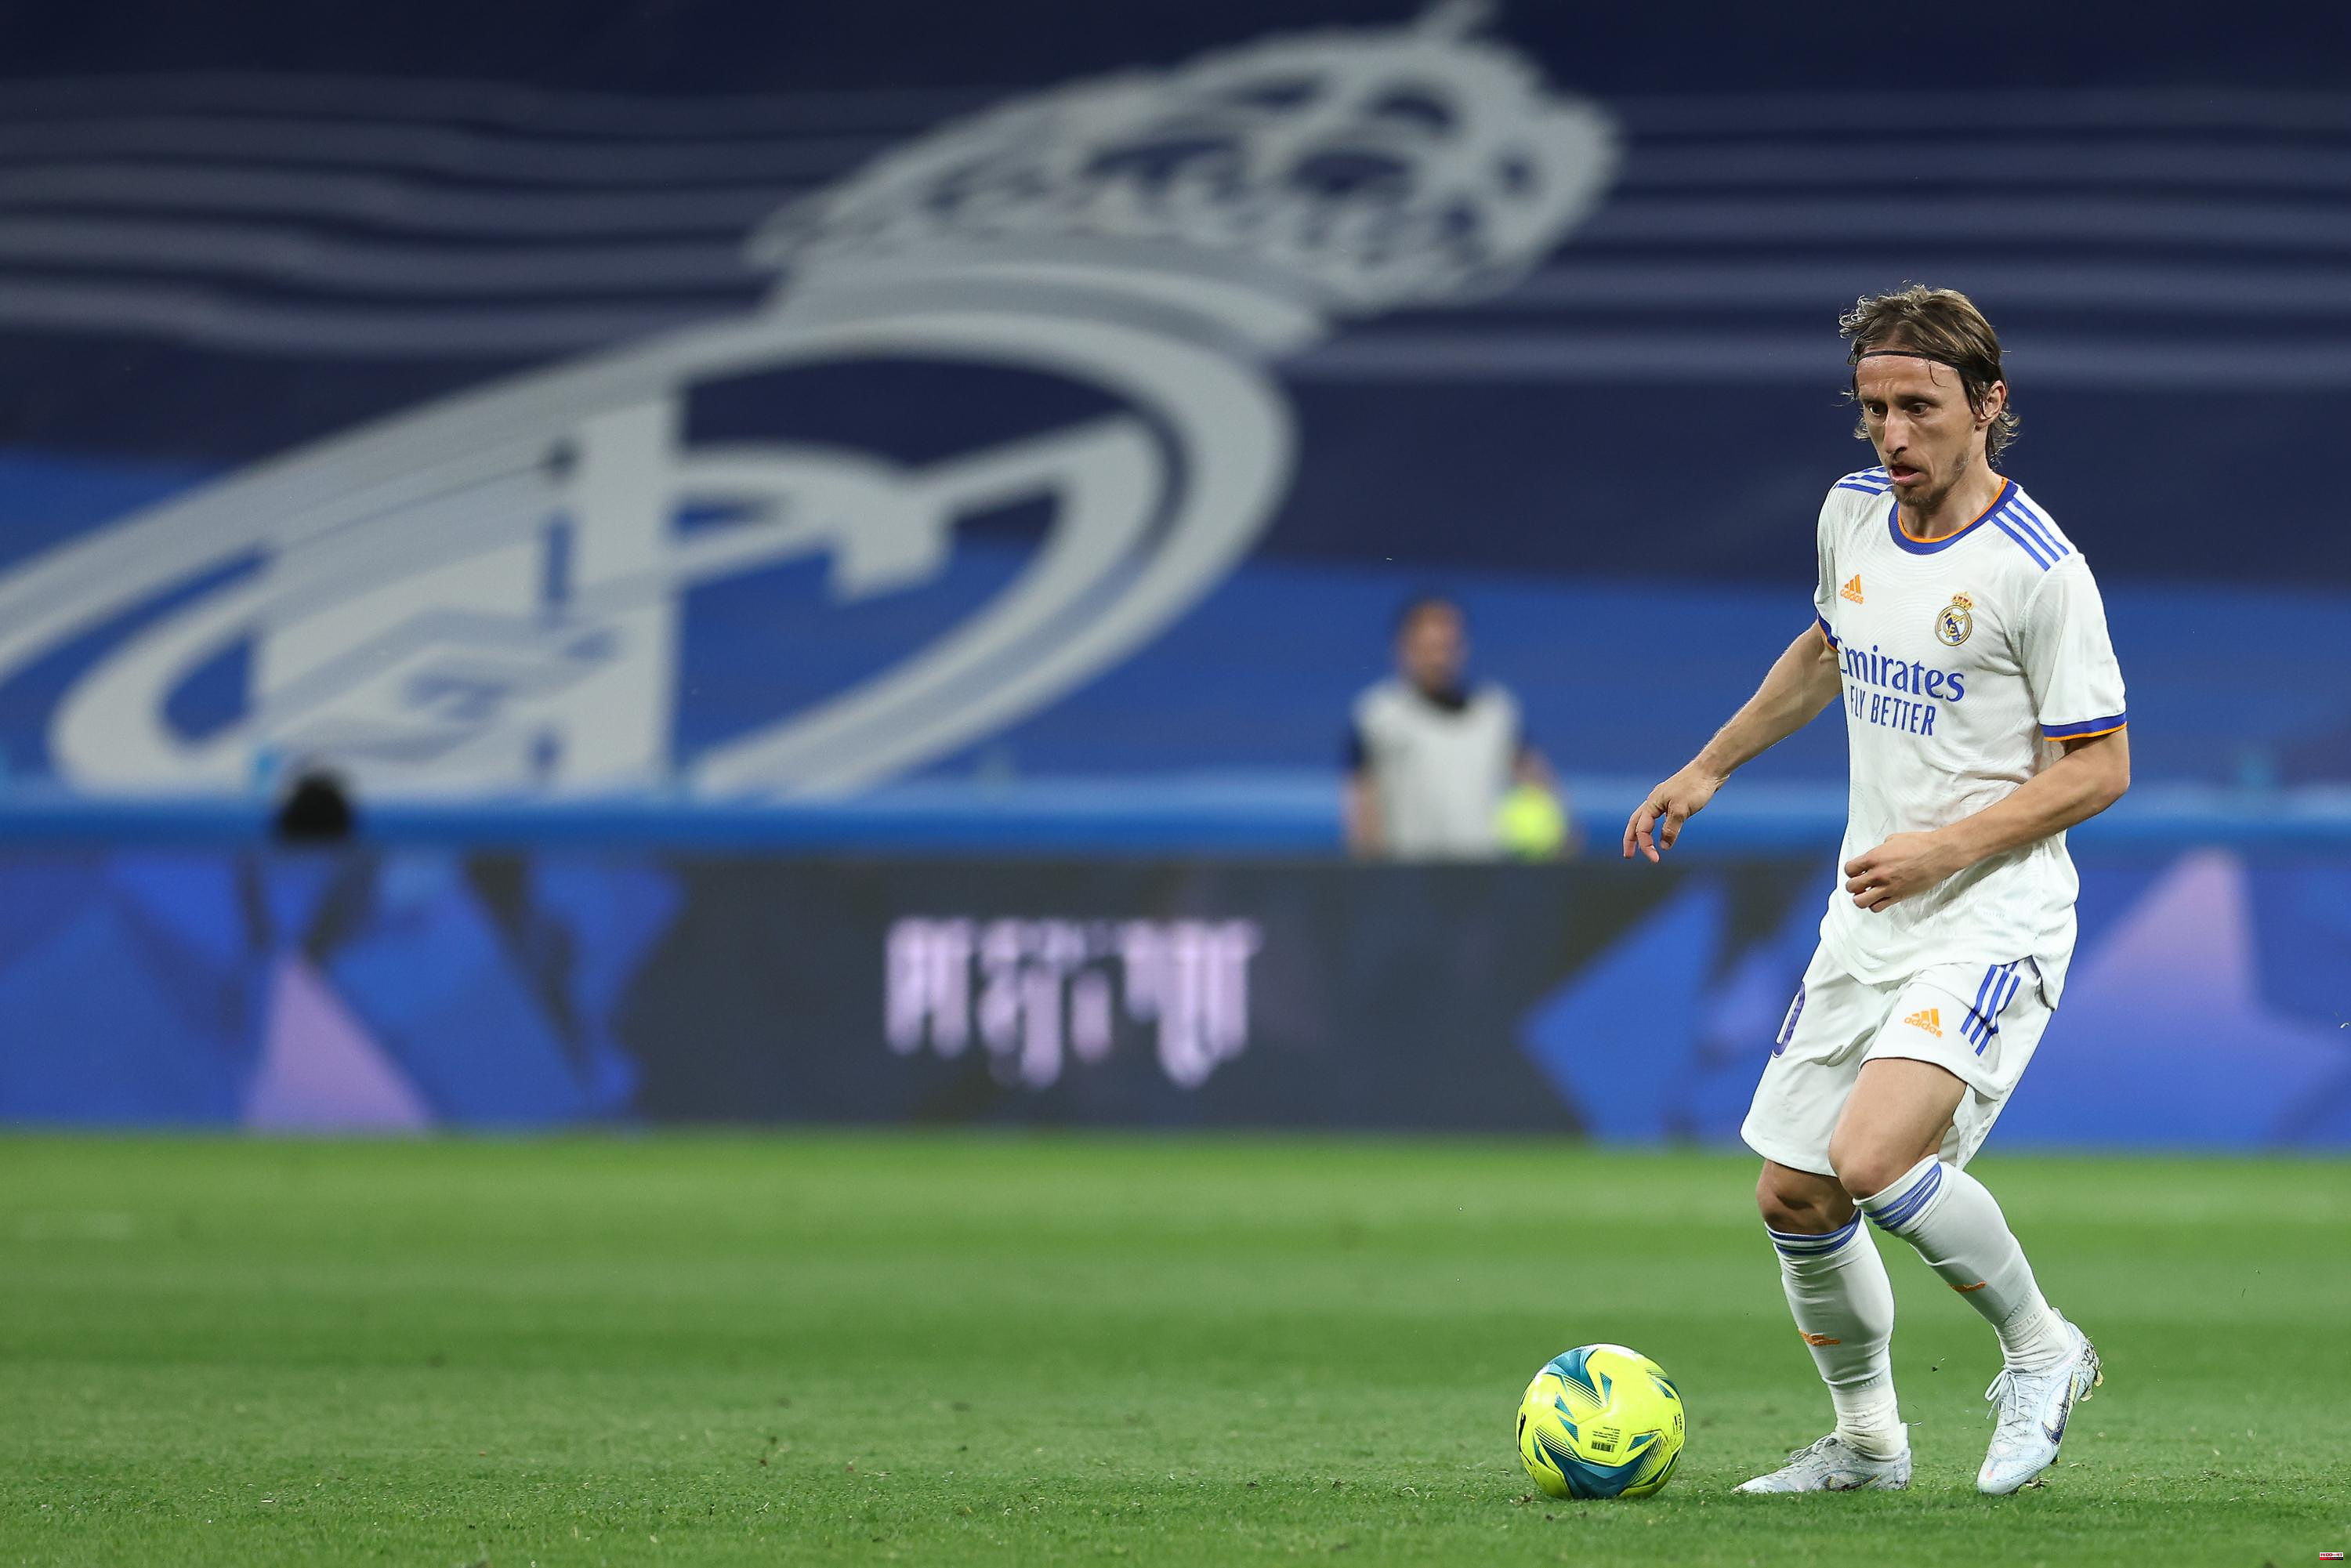 Real Madrid: Modric is about to extend and does not want to "do a Mbappé"